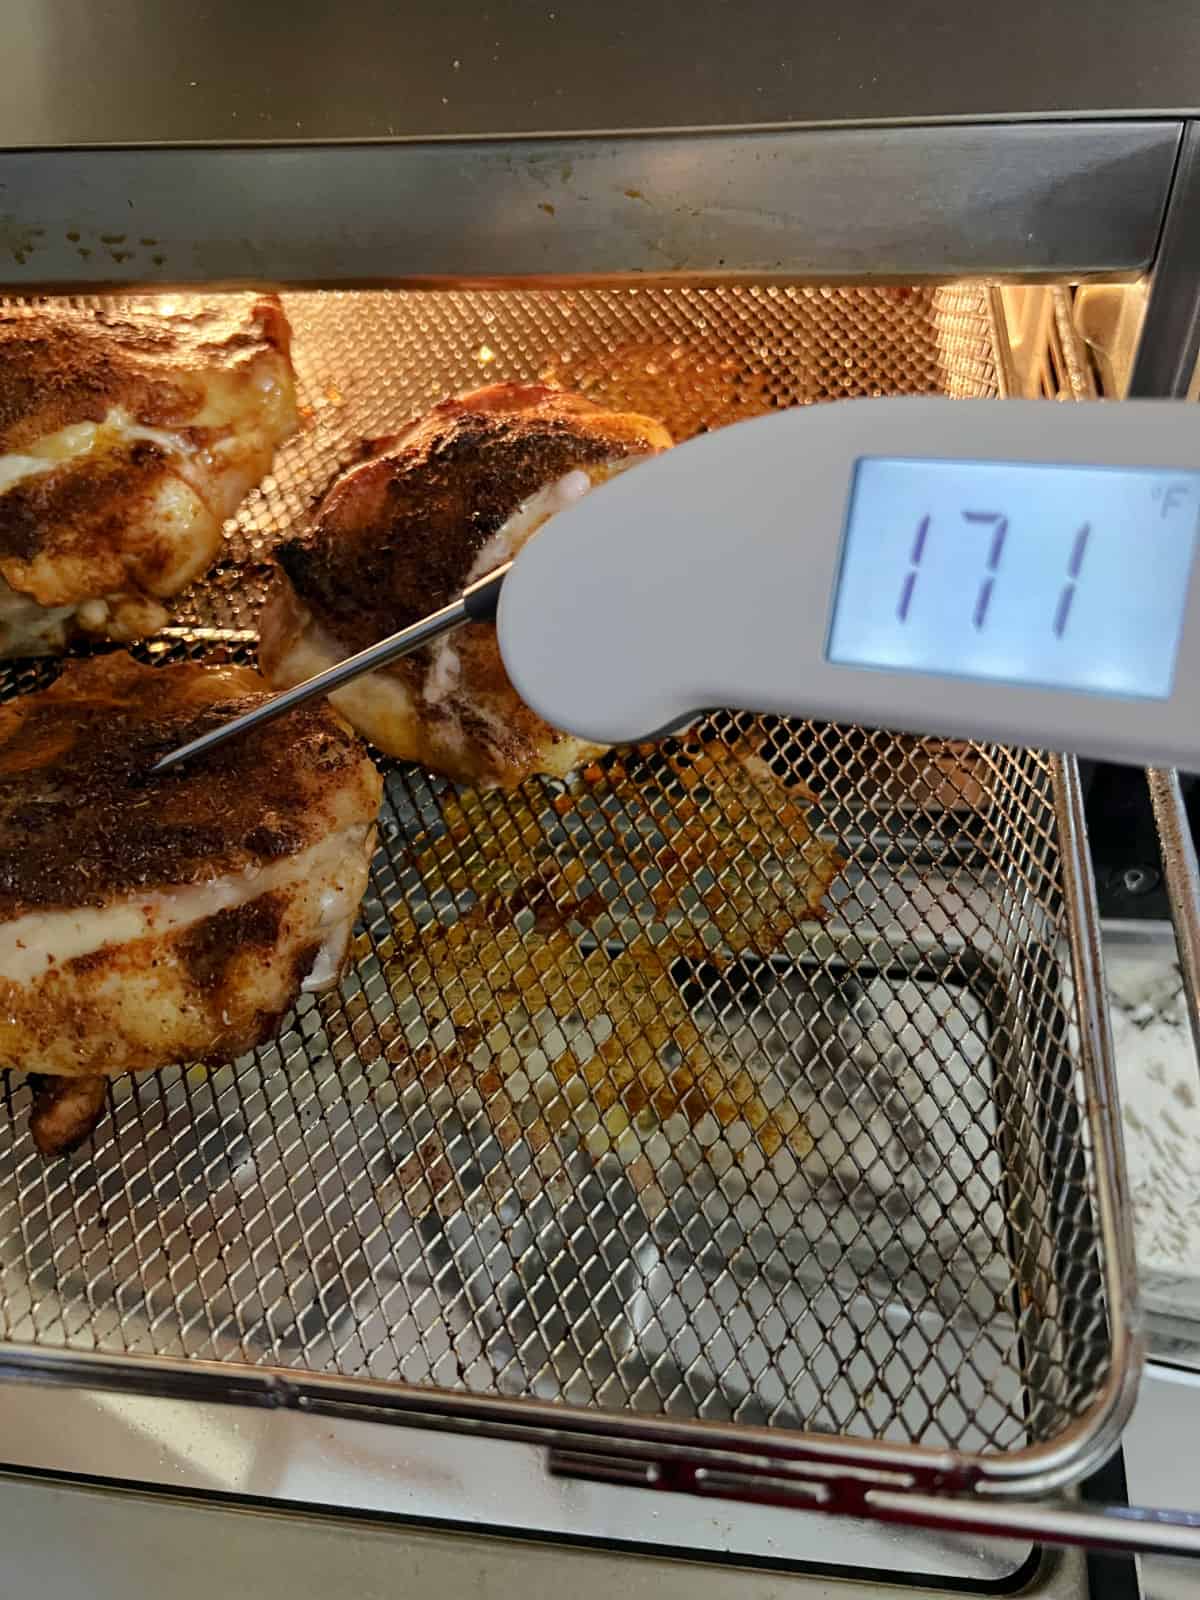 using a meat thermometer to check internal temperature.